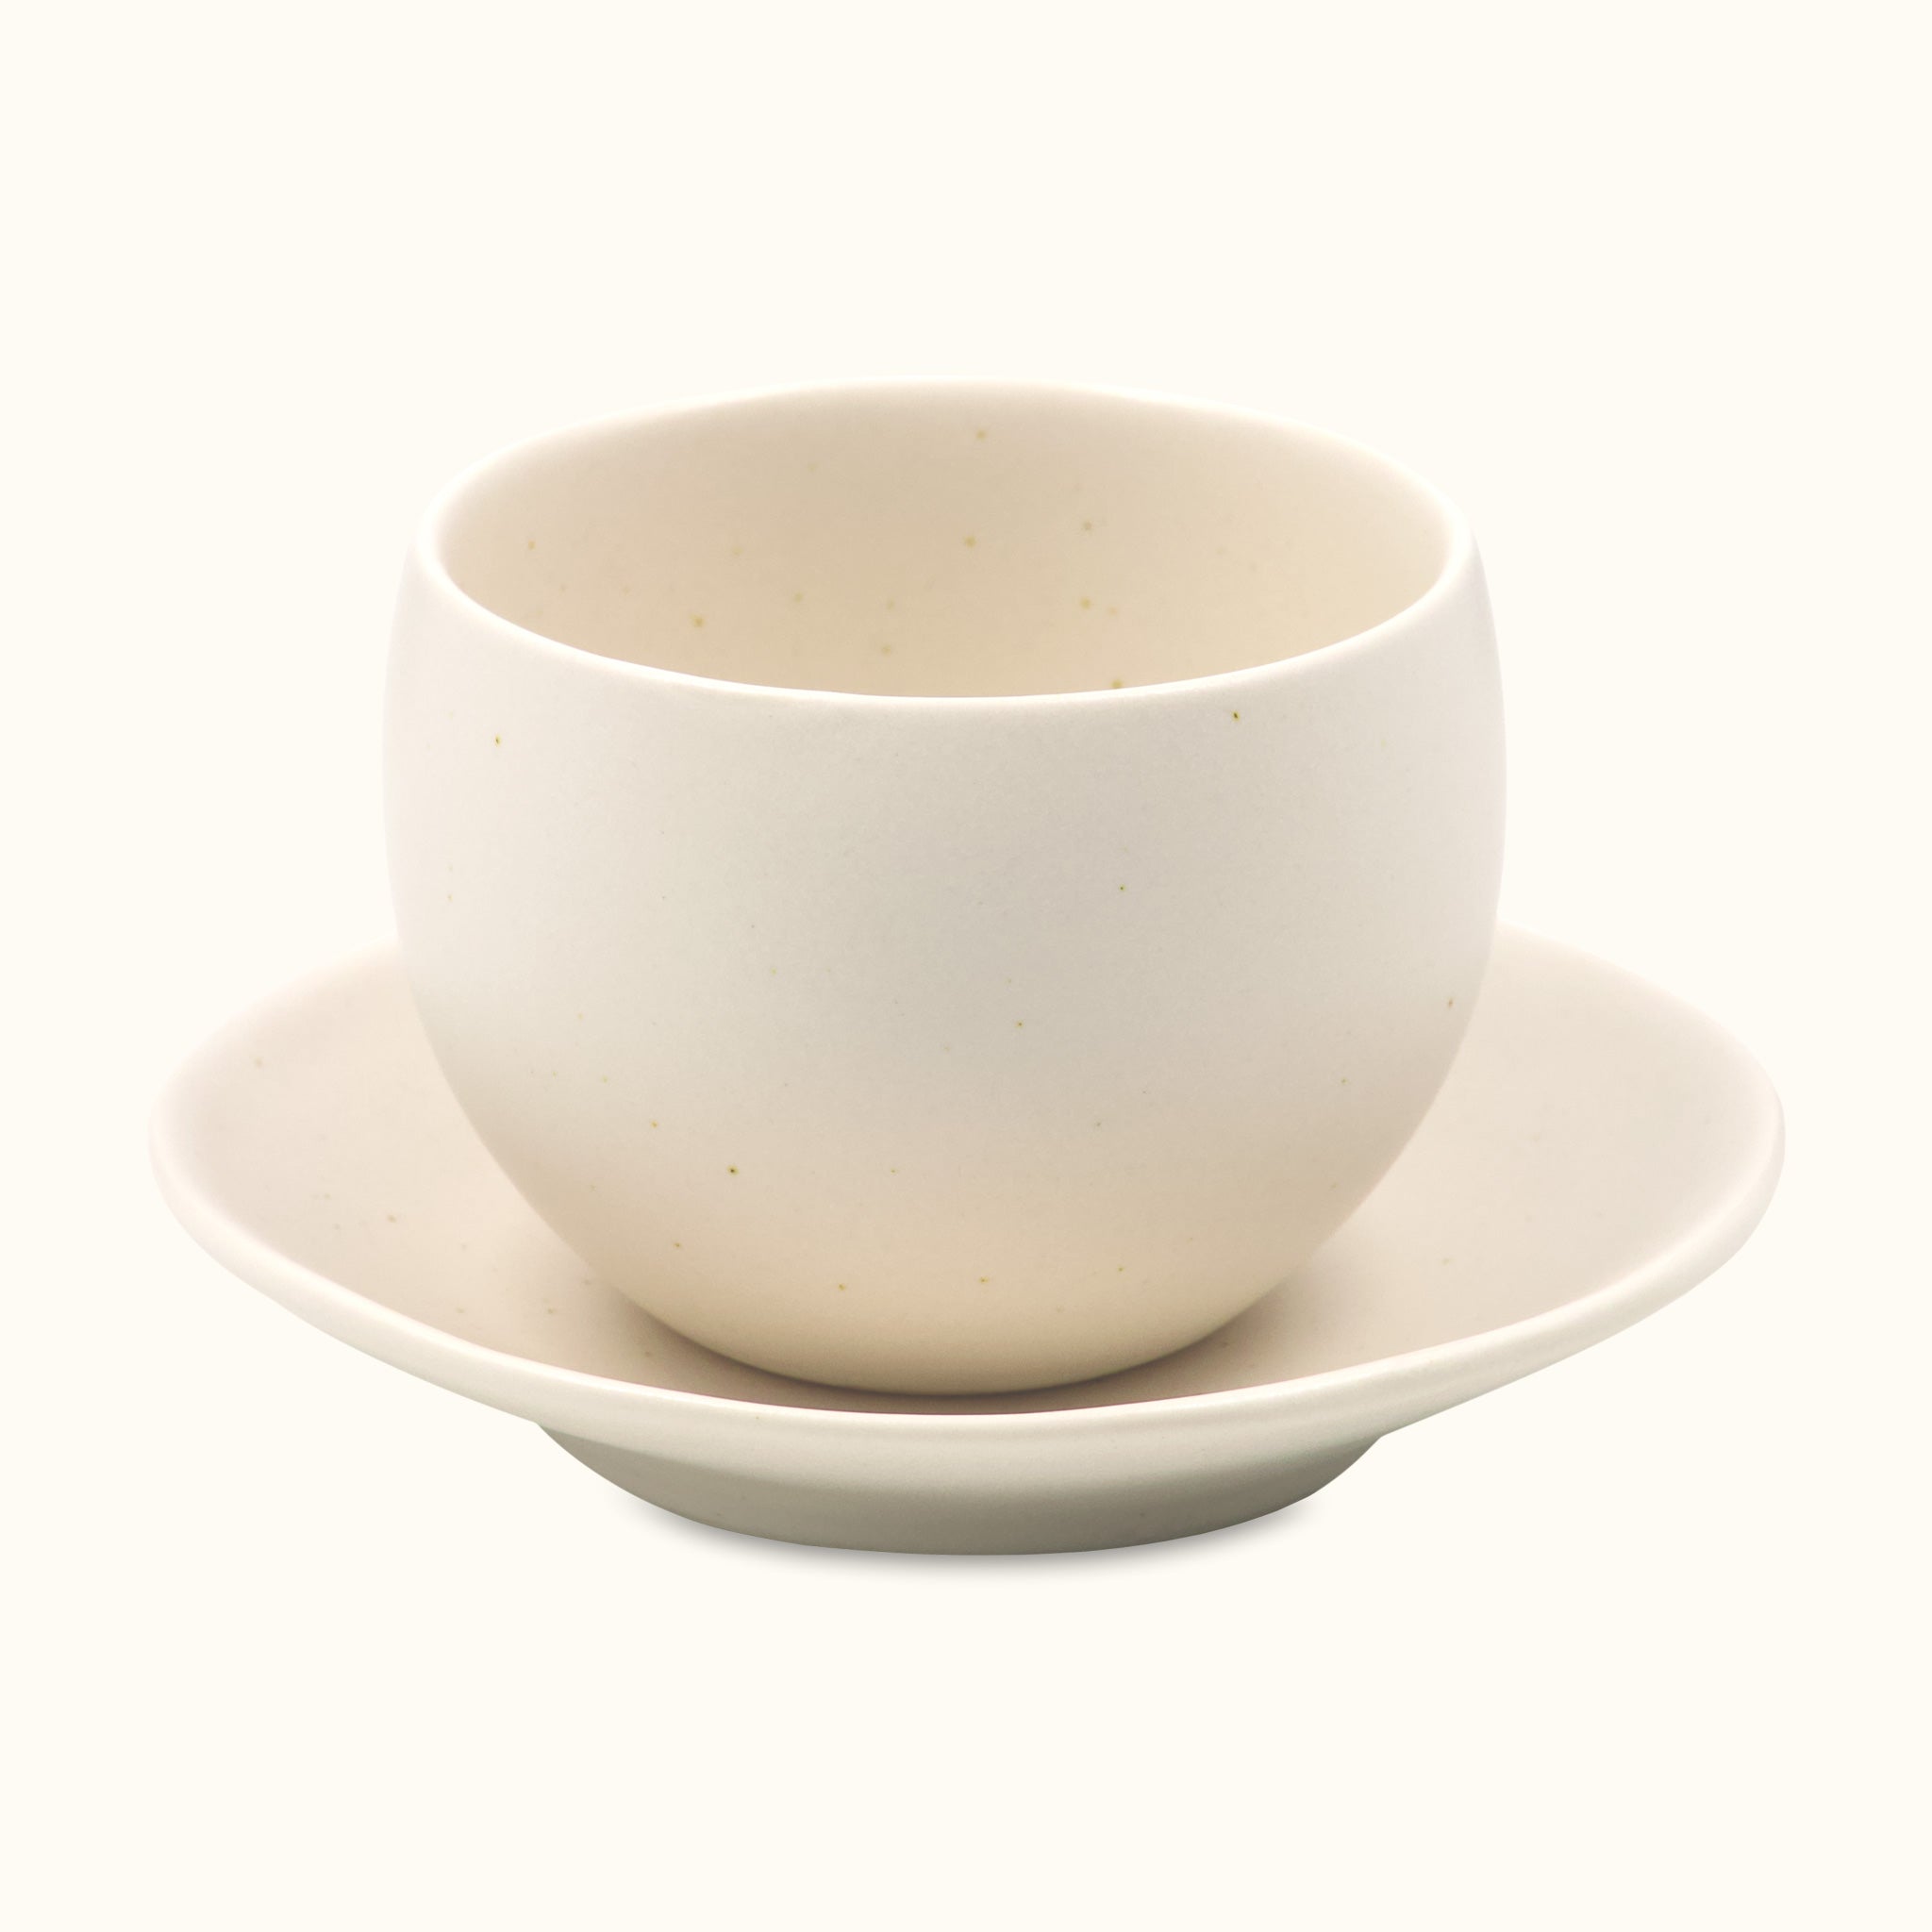 Arita Porcelain Coffee Cup  Our Handcrafted Porcelain Keep-Cup